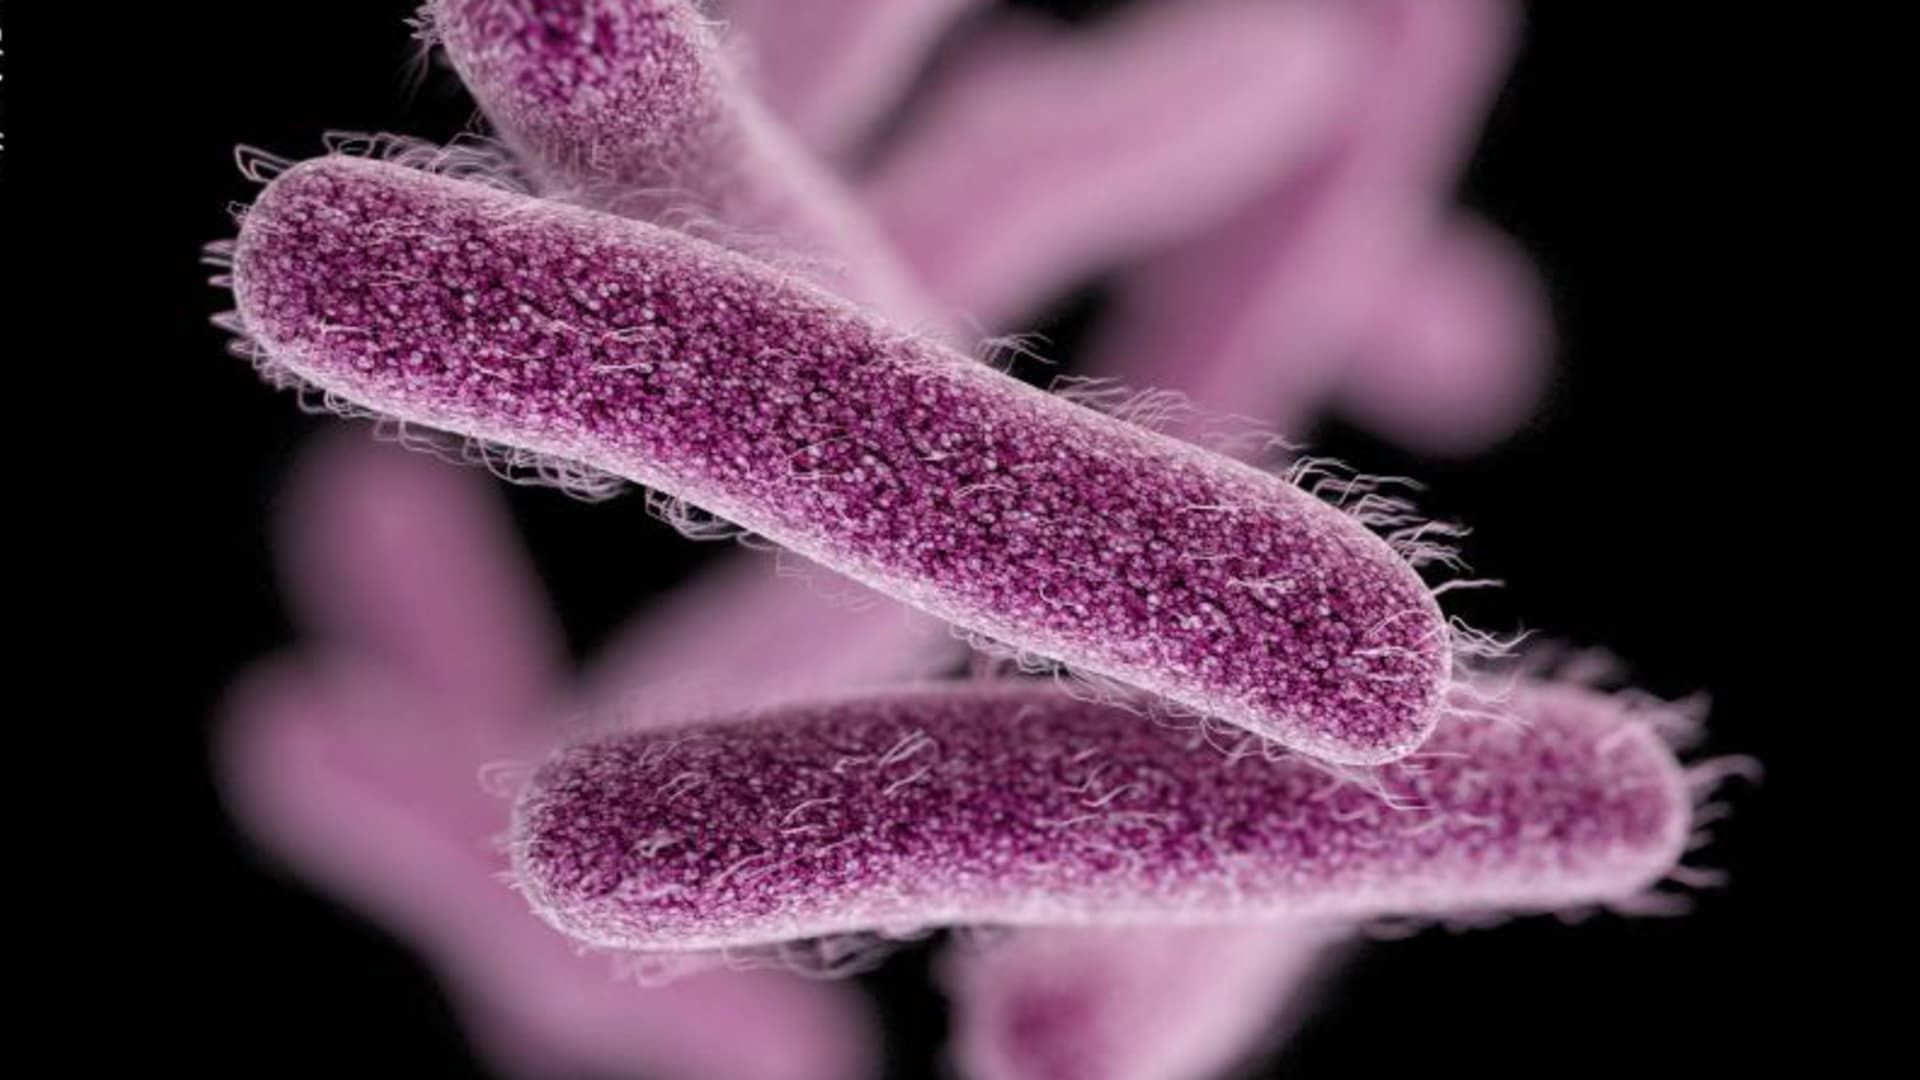 CDC warns drug resistant stomach bug: What is it?